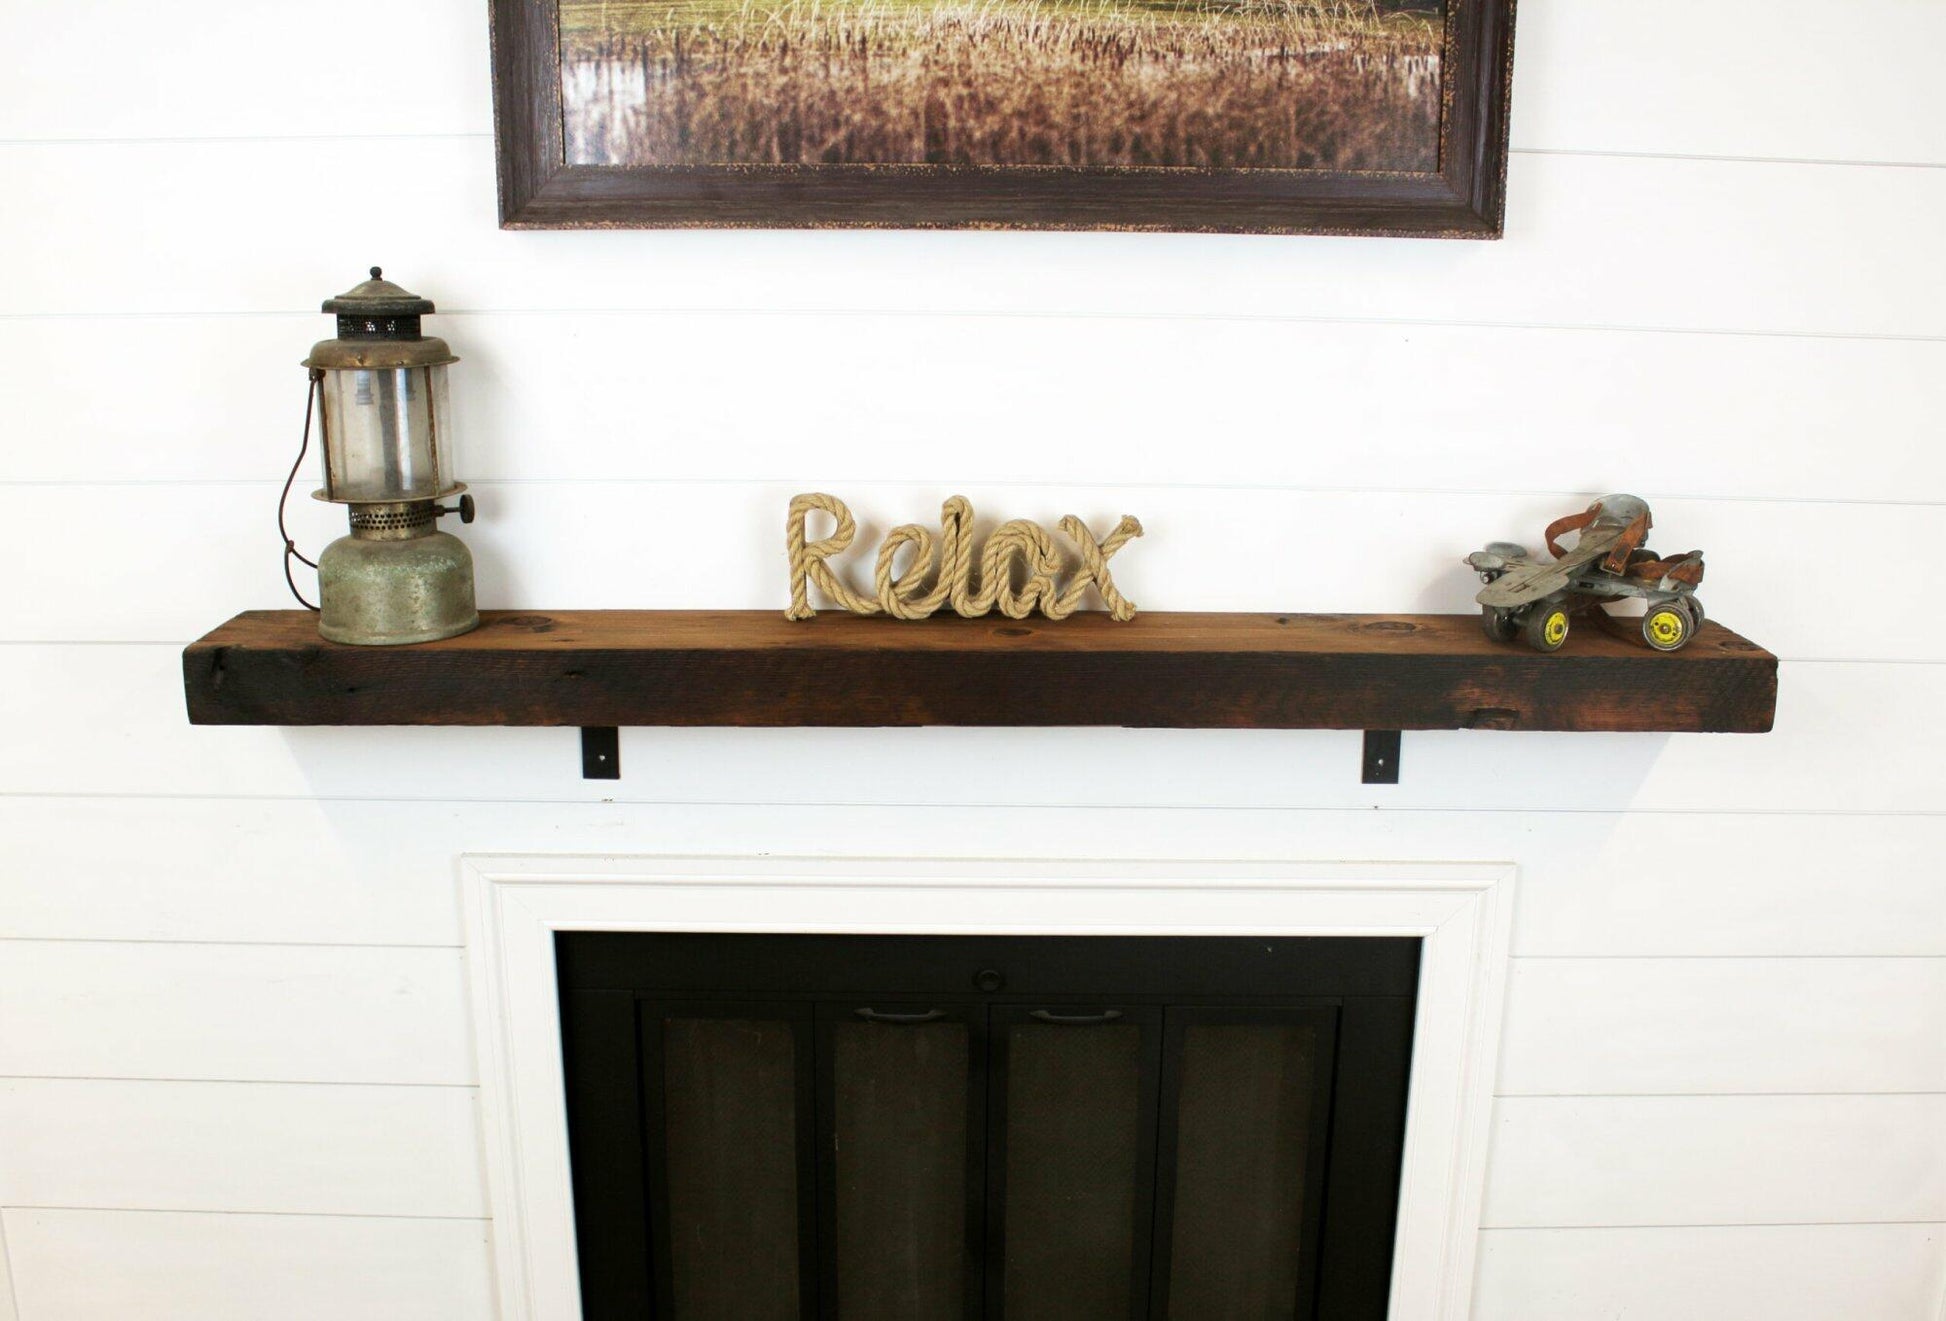 skip-planed reclaimed barnwood fireplace mantel. Front face is darker than top side of mantel.